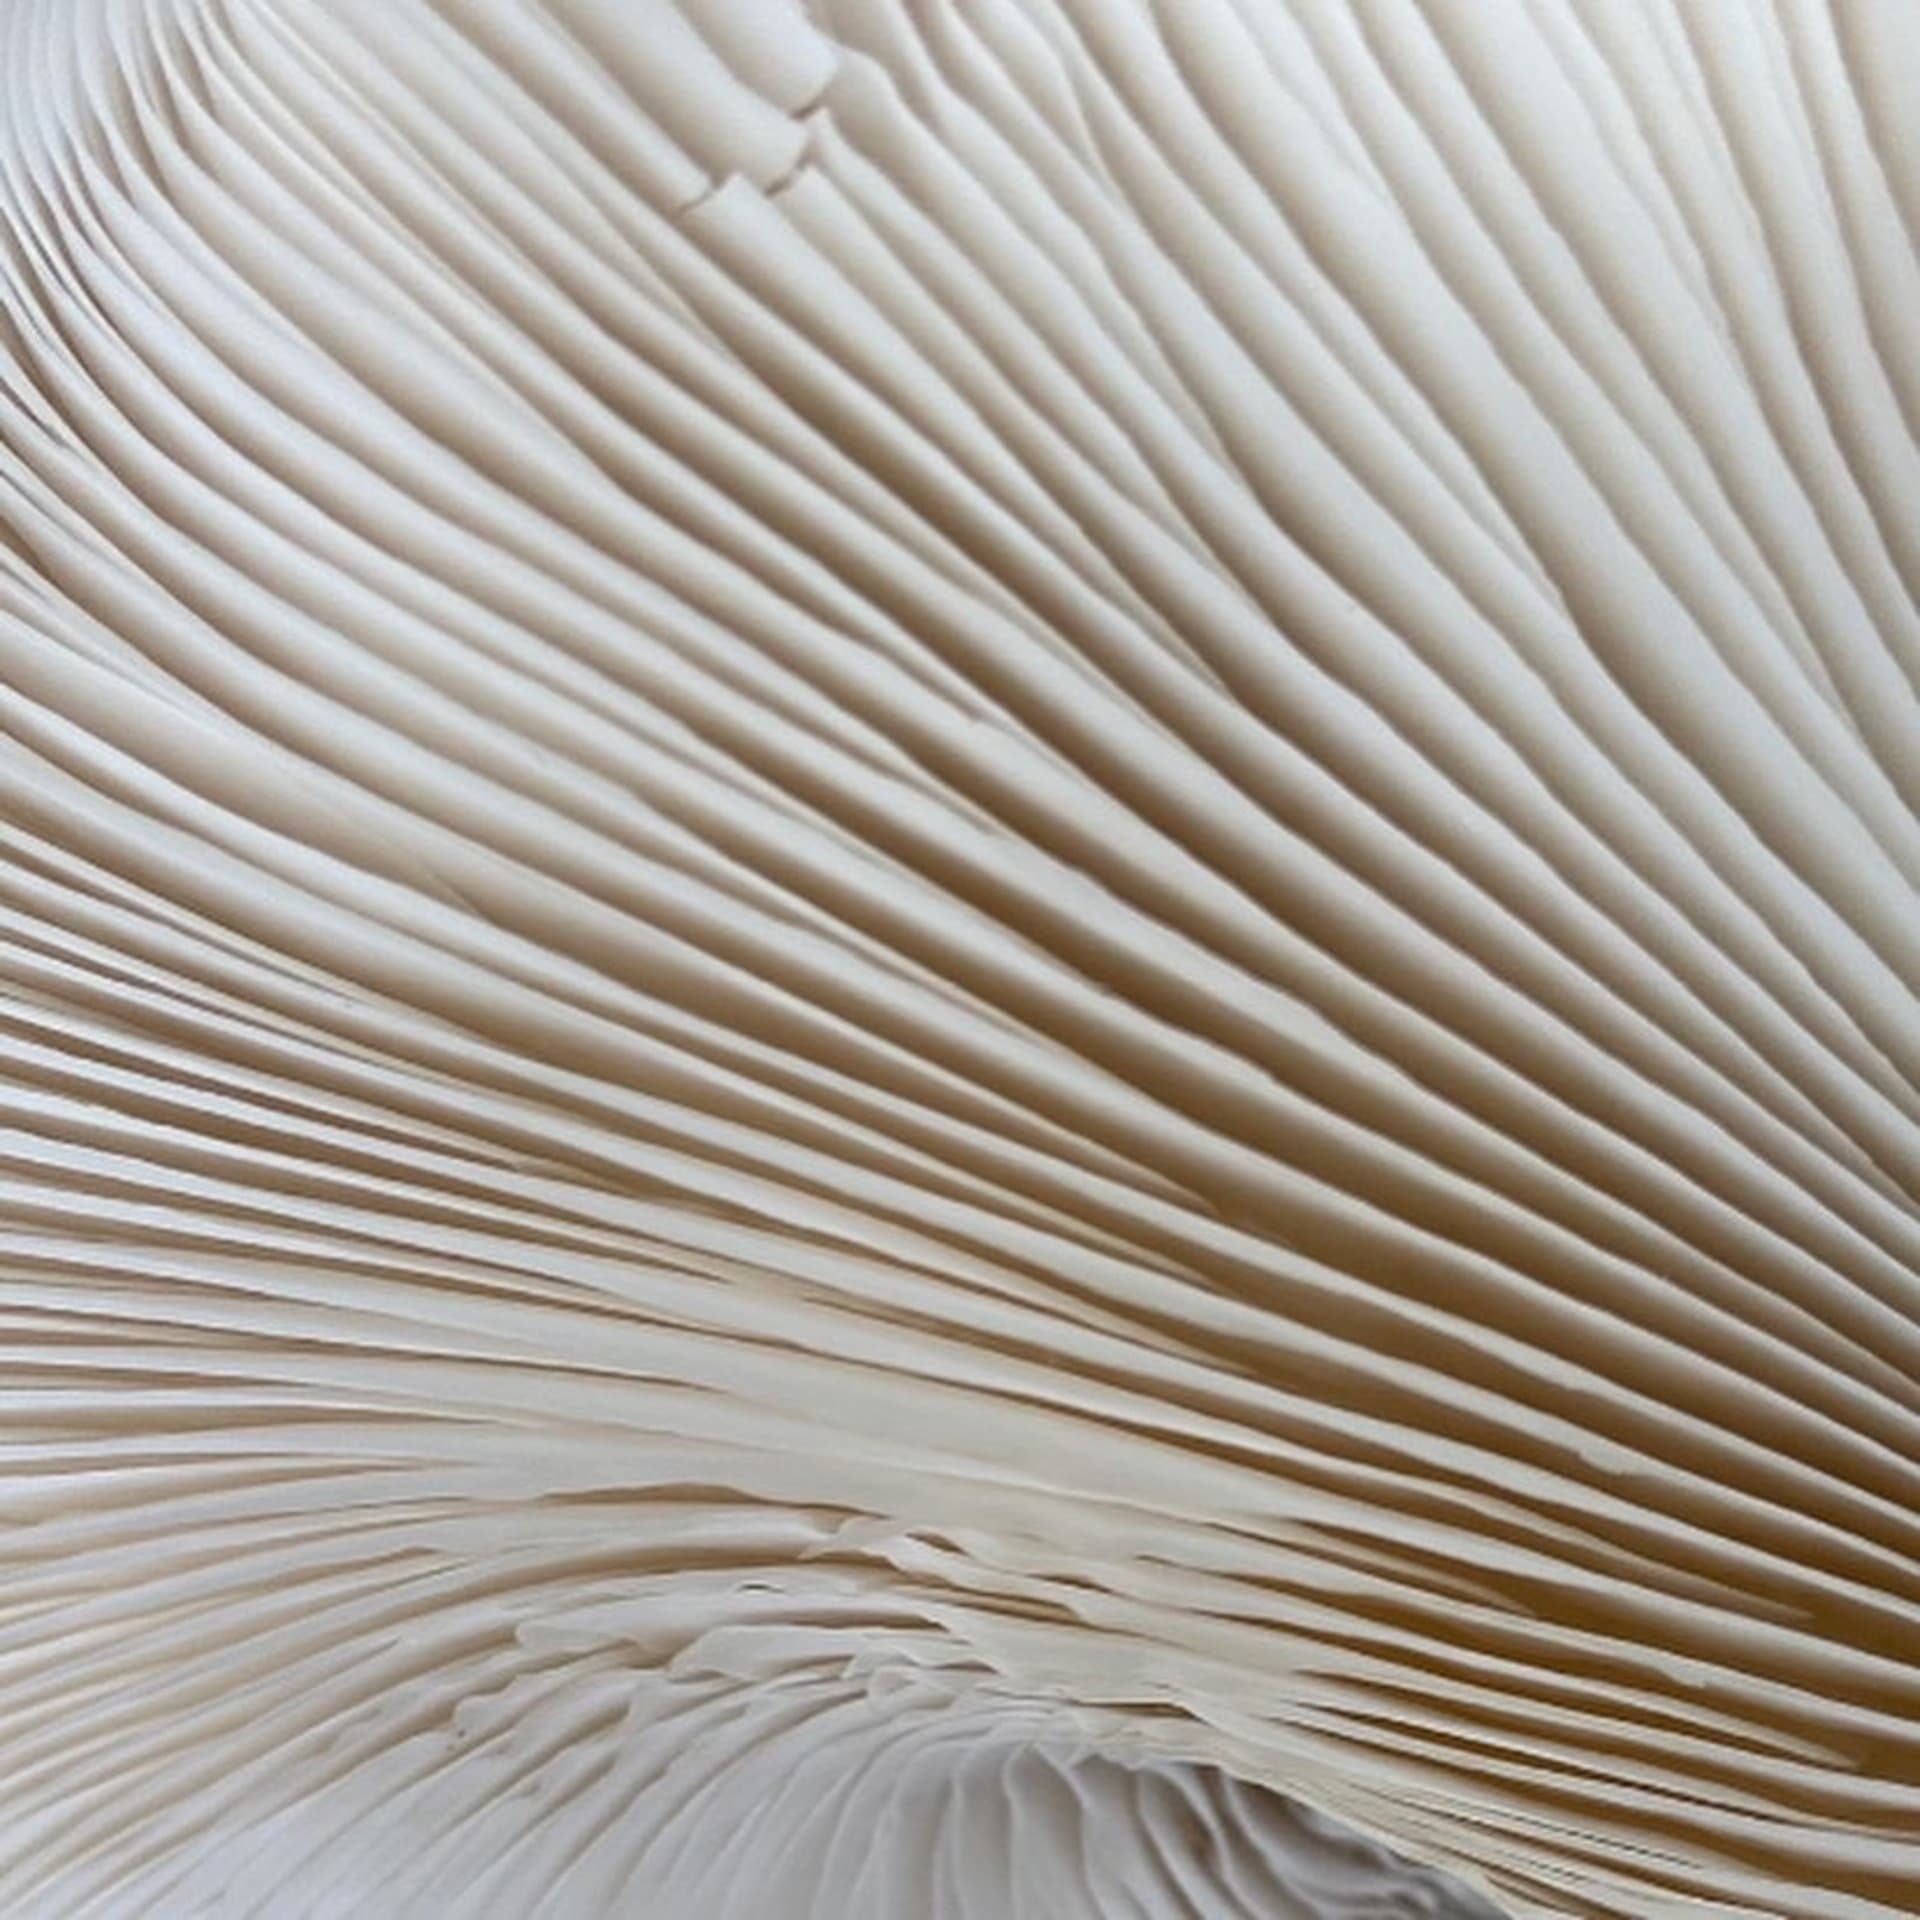 An image of the structure of the mushrooms before casting.